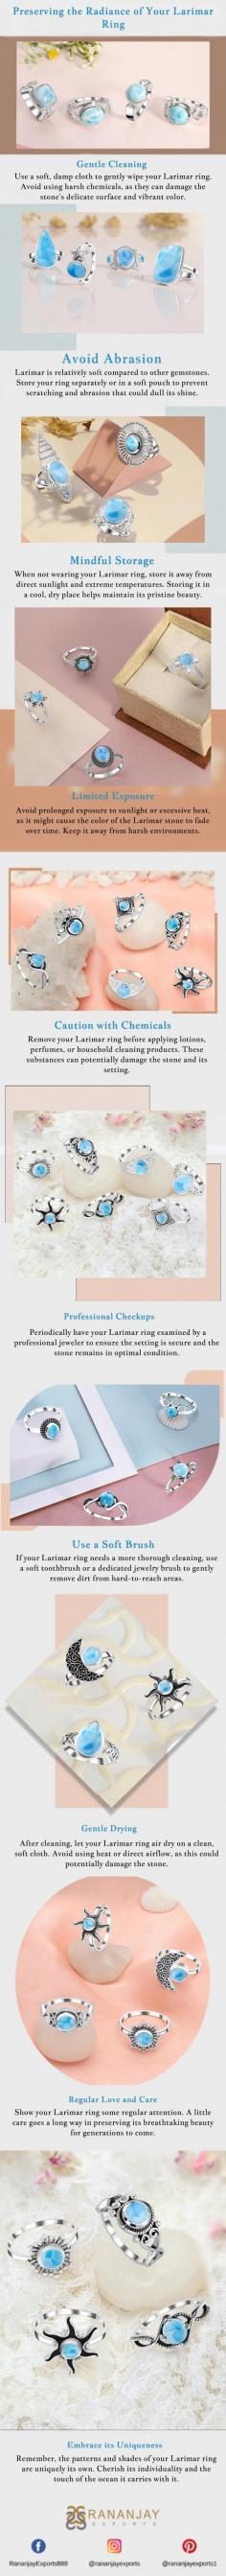 Preserving the Radiance of Your Larimar Ring

1. Gentle Cleaning 